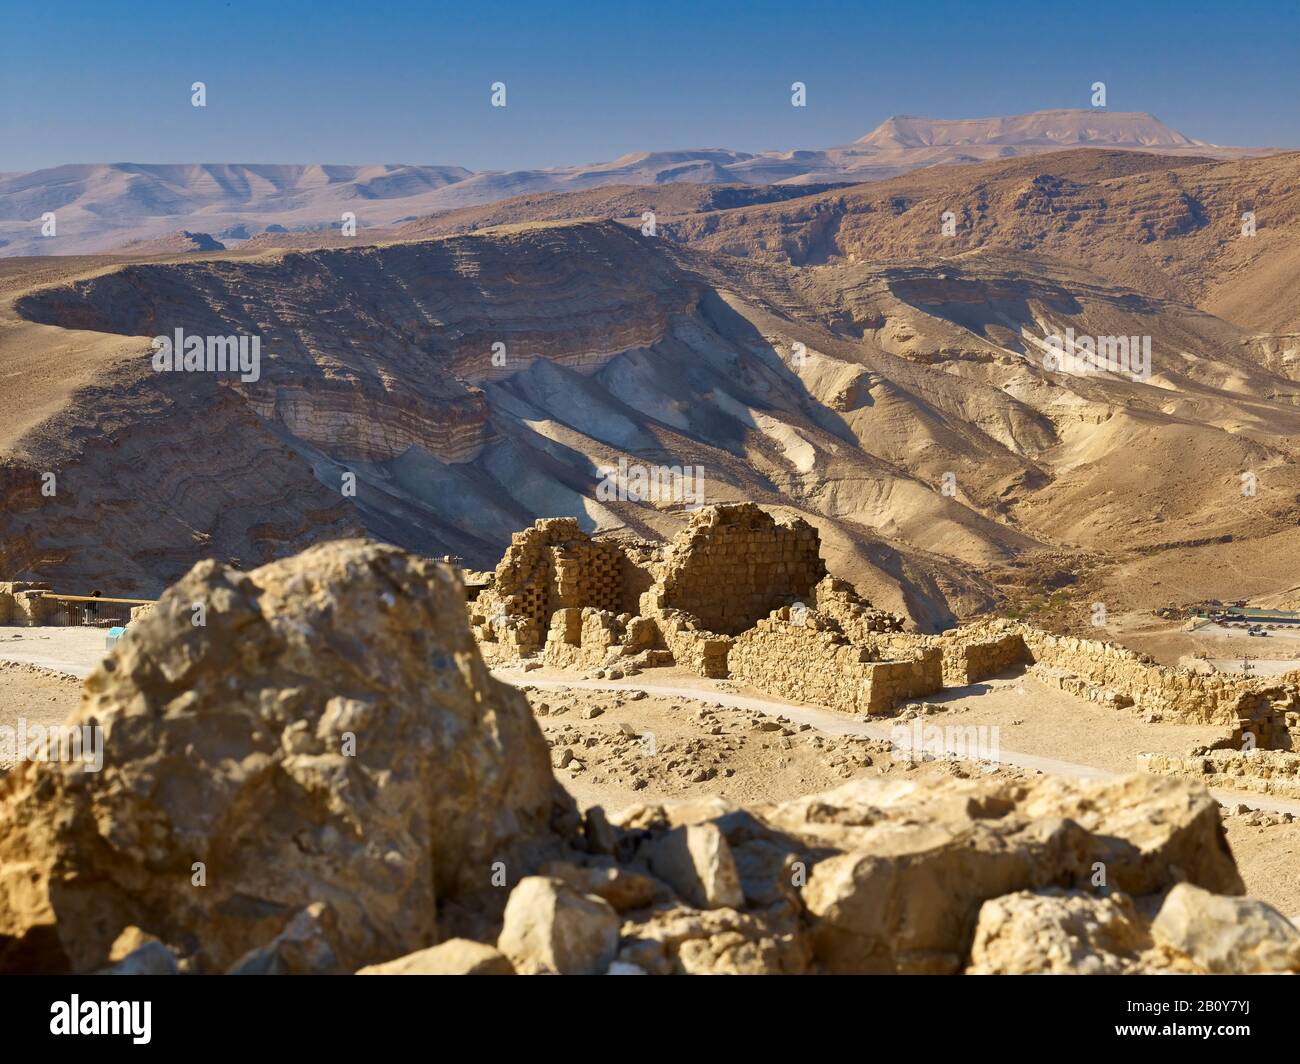 Columbarium, tower with landscape on the Jewish rock fortress Masada on the Dead Sea, Israel, Middle East, Stock Photo